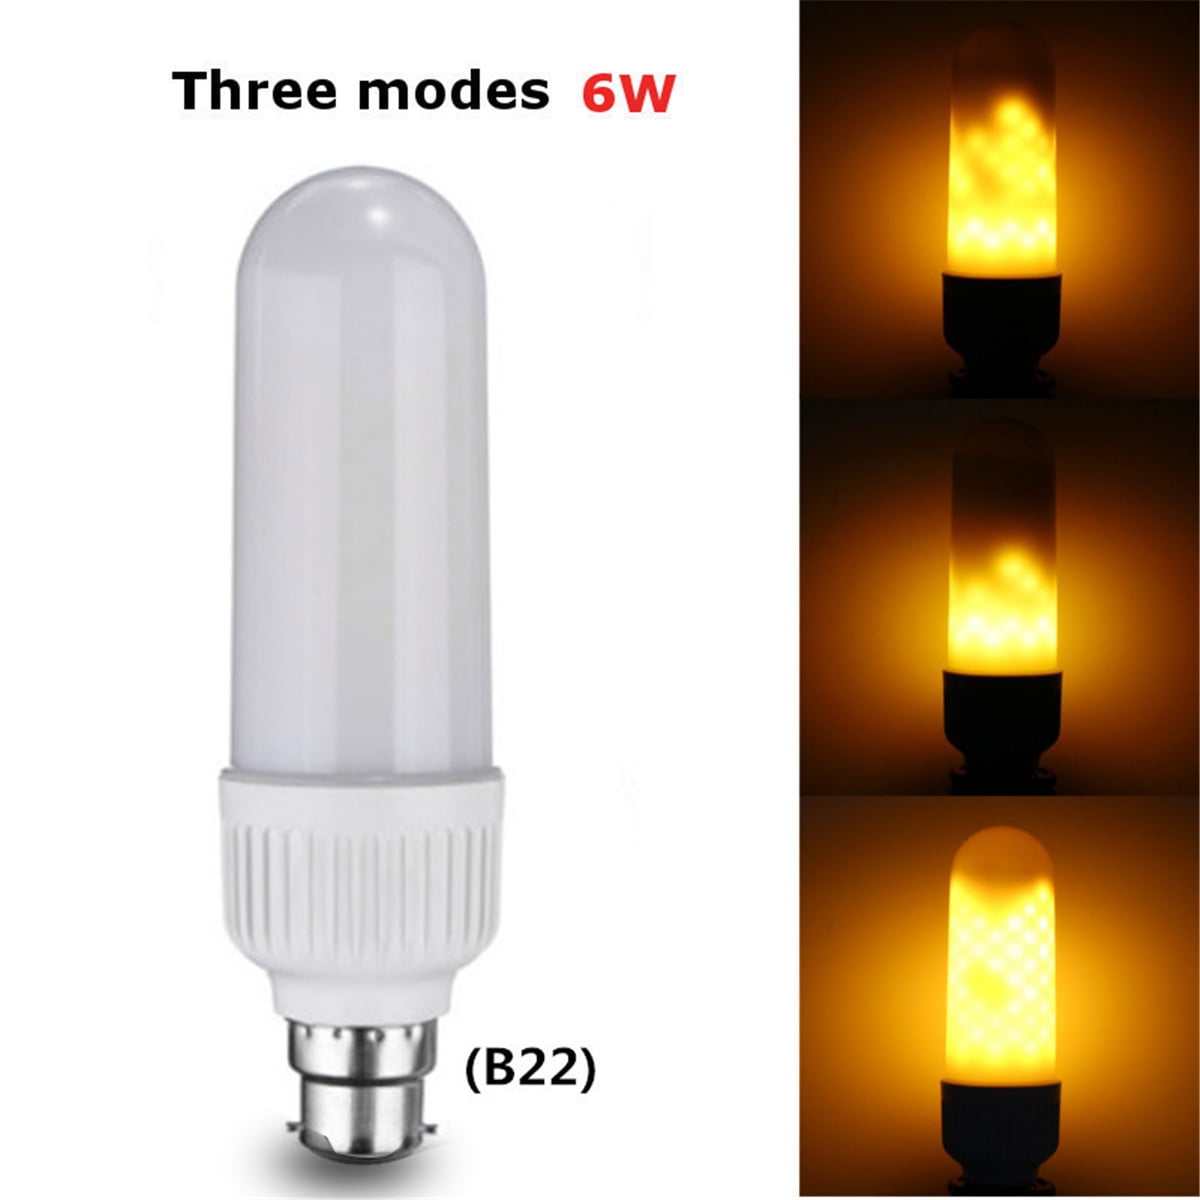 1 Pack Flame Effect LED Bulb 5W B22 Base Flickering Fire Decorative Light Bulb for Garden Home Table